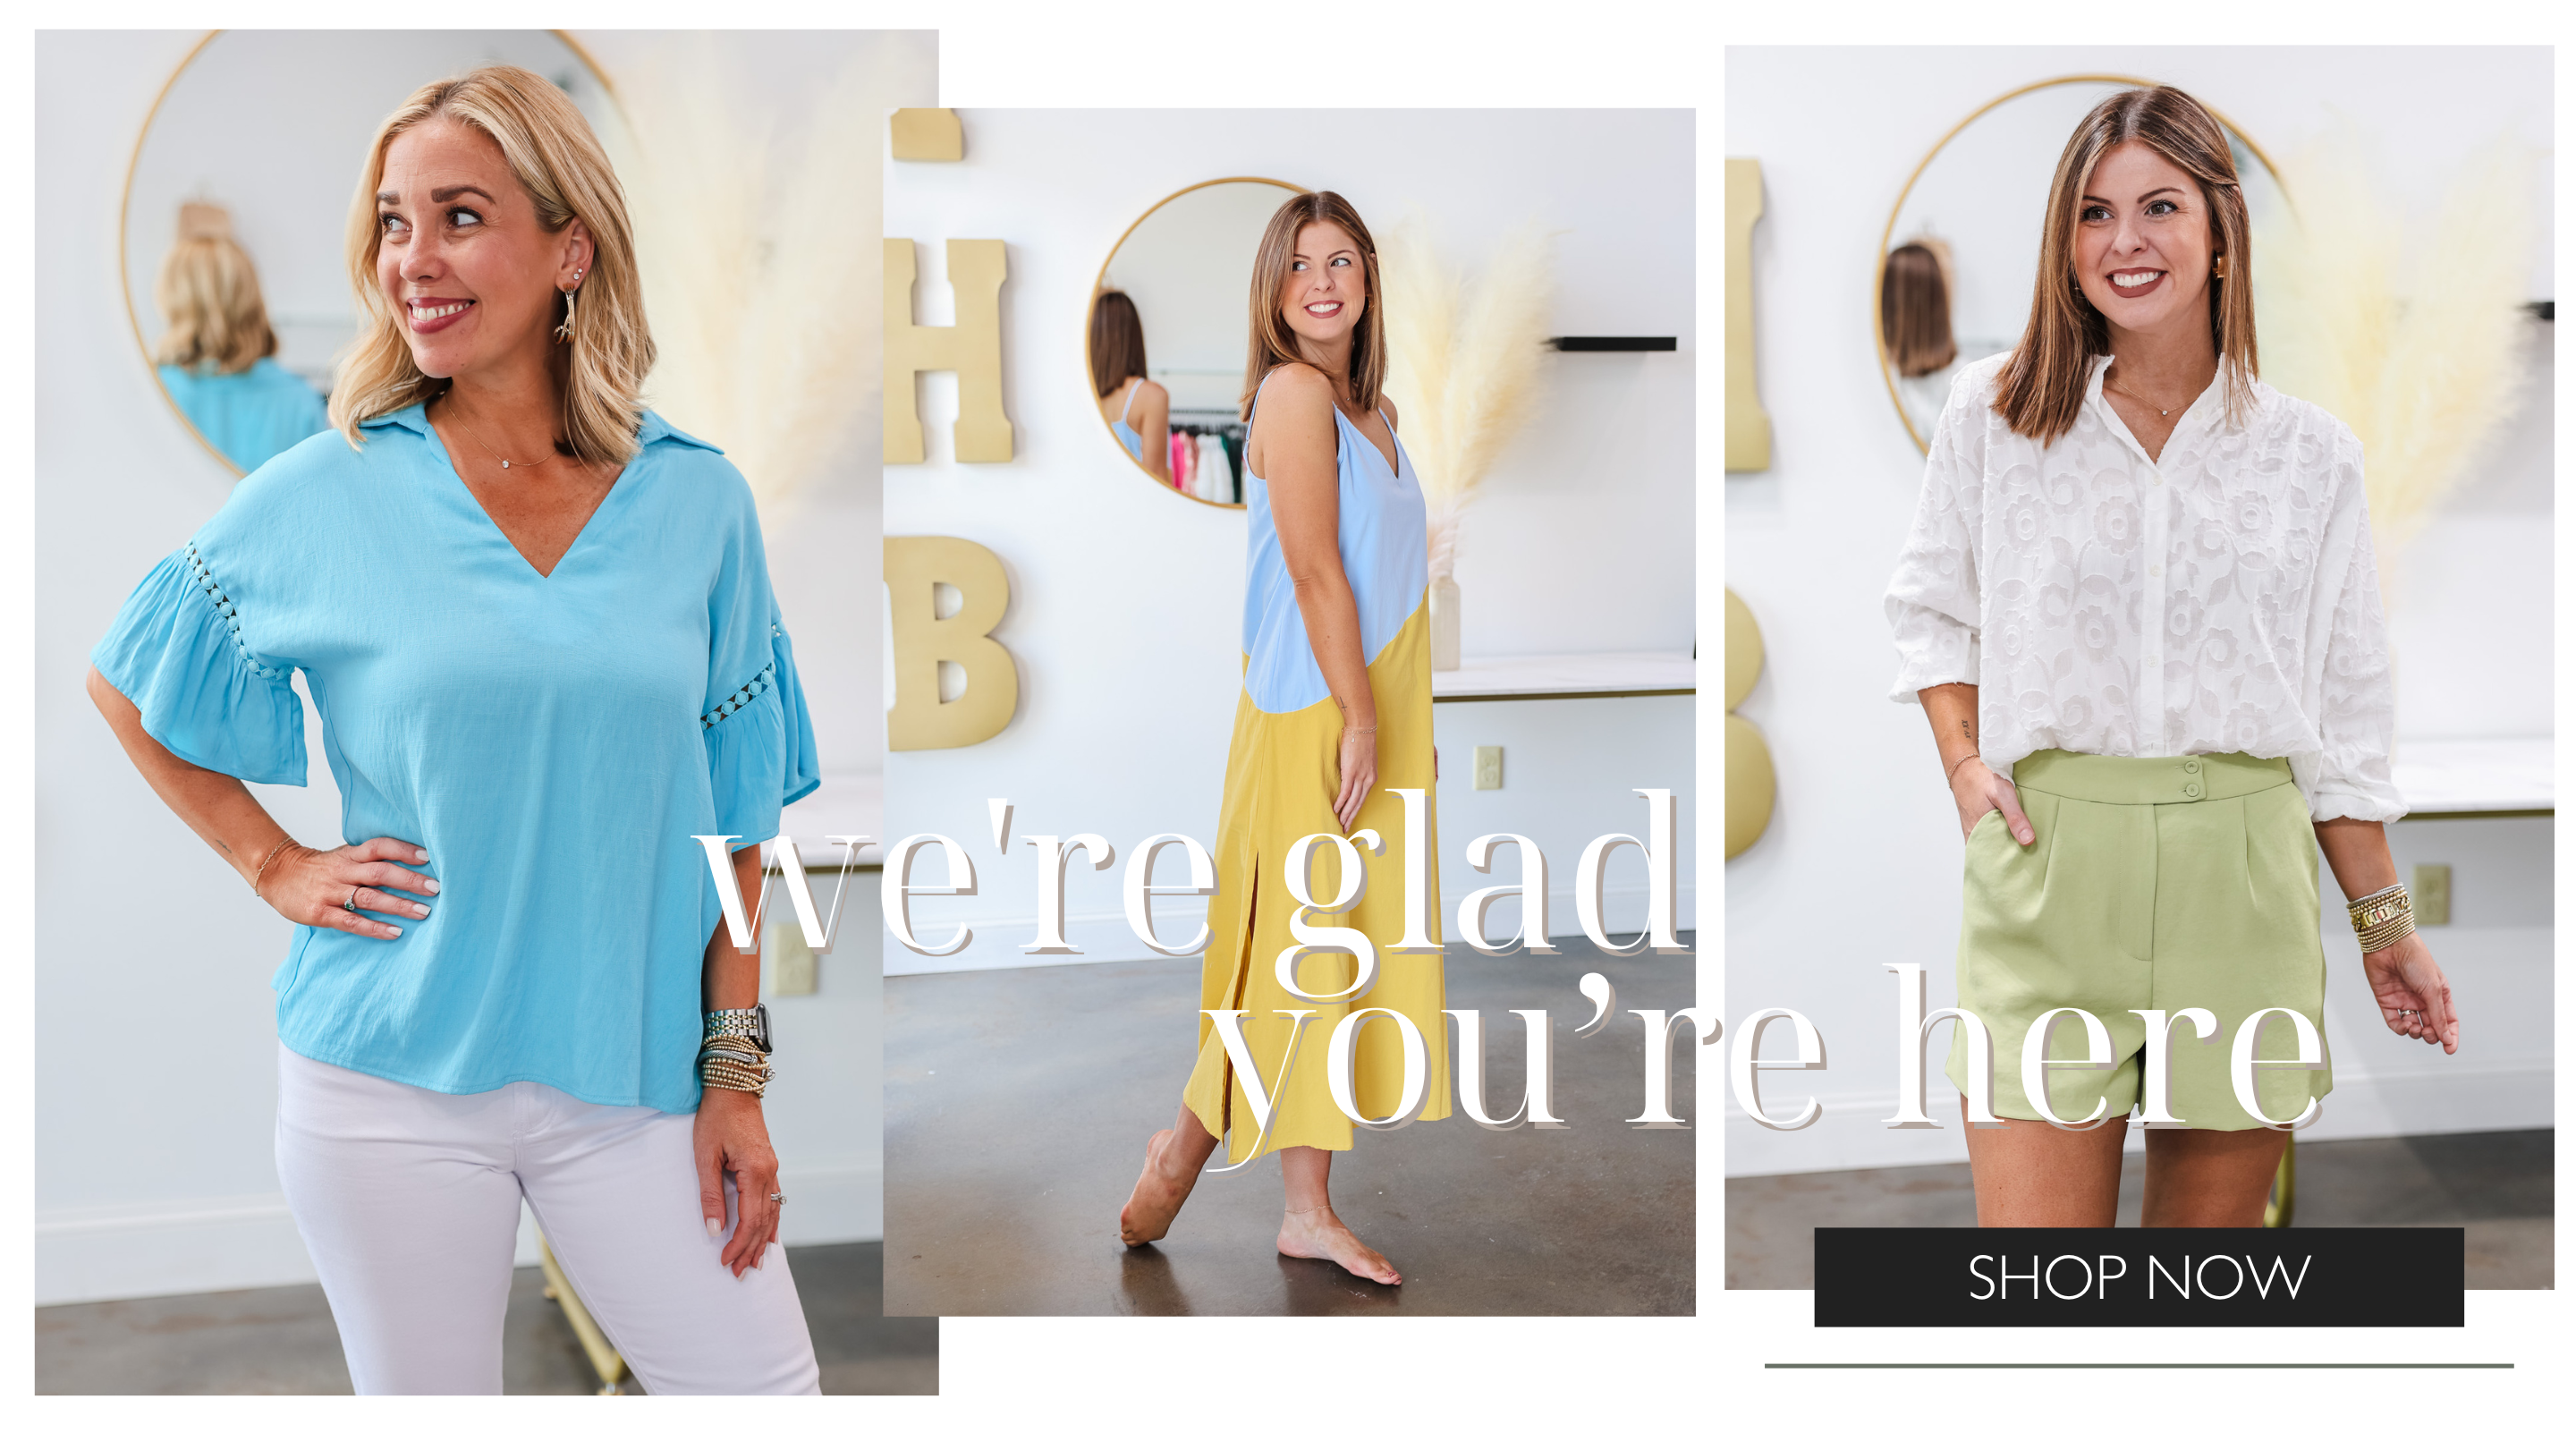 Three photos of three women wearing outfits inside Ivy House Boutique. Text overlay says "We're glad you're here."